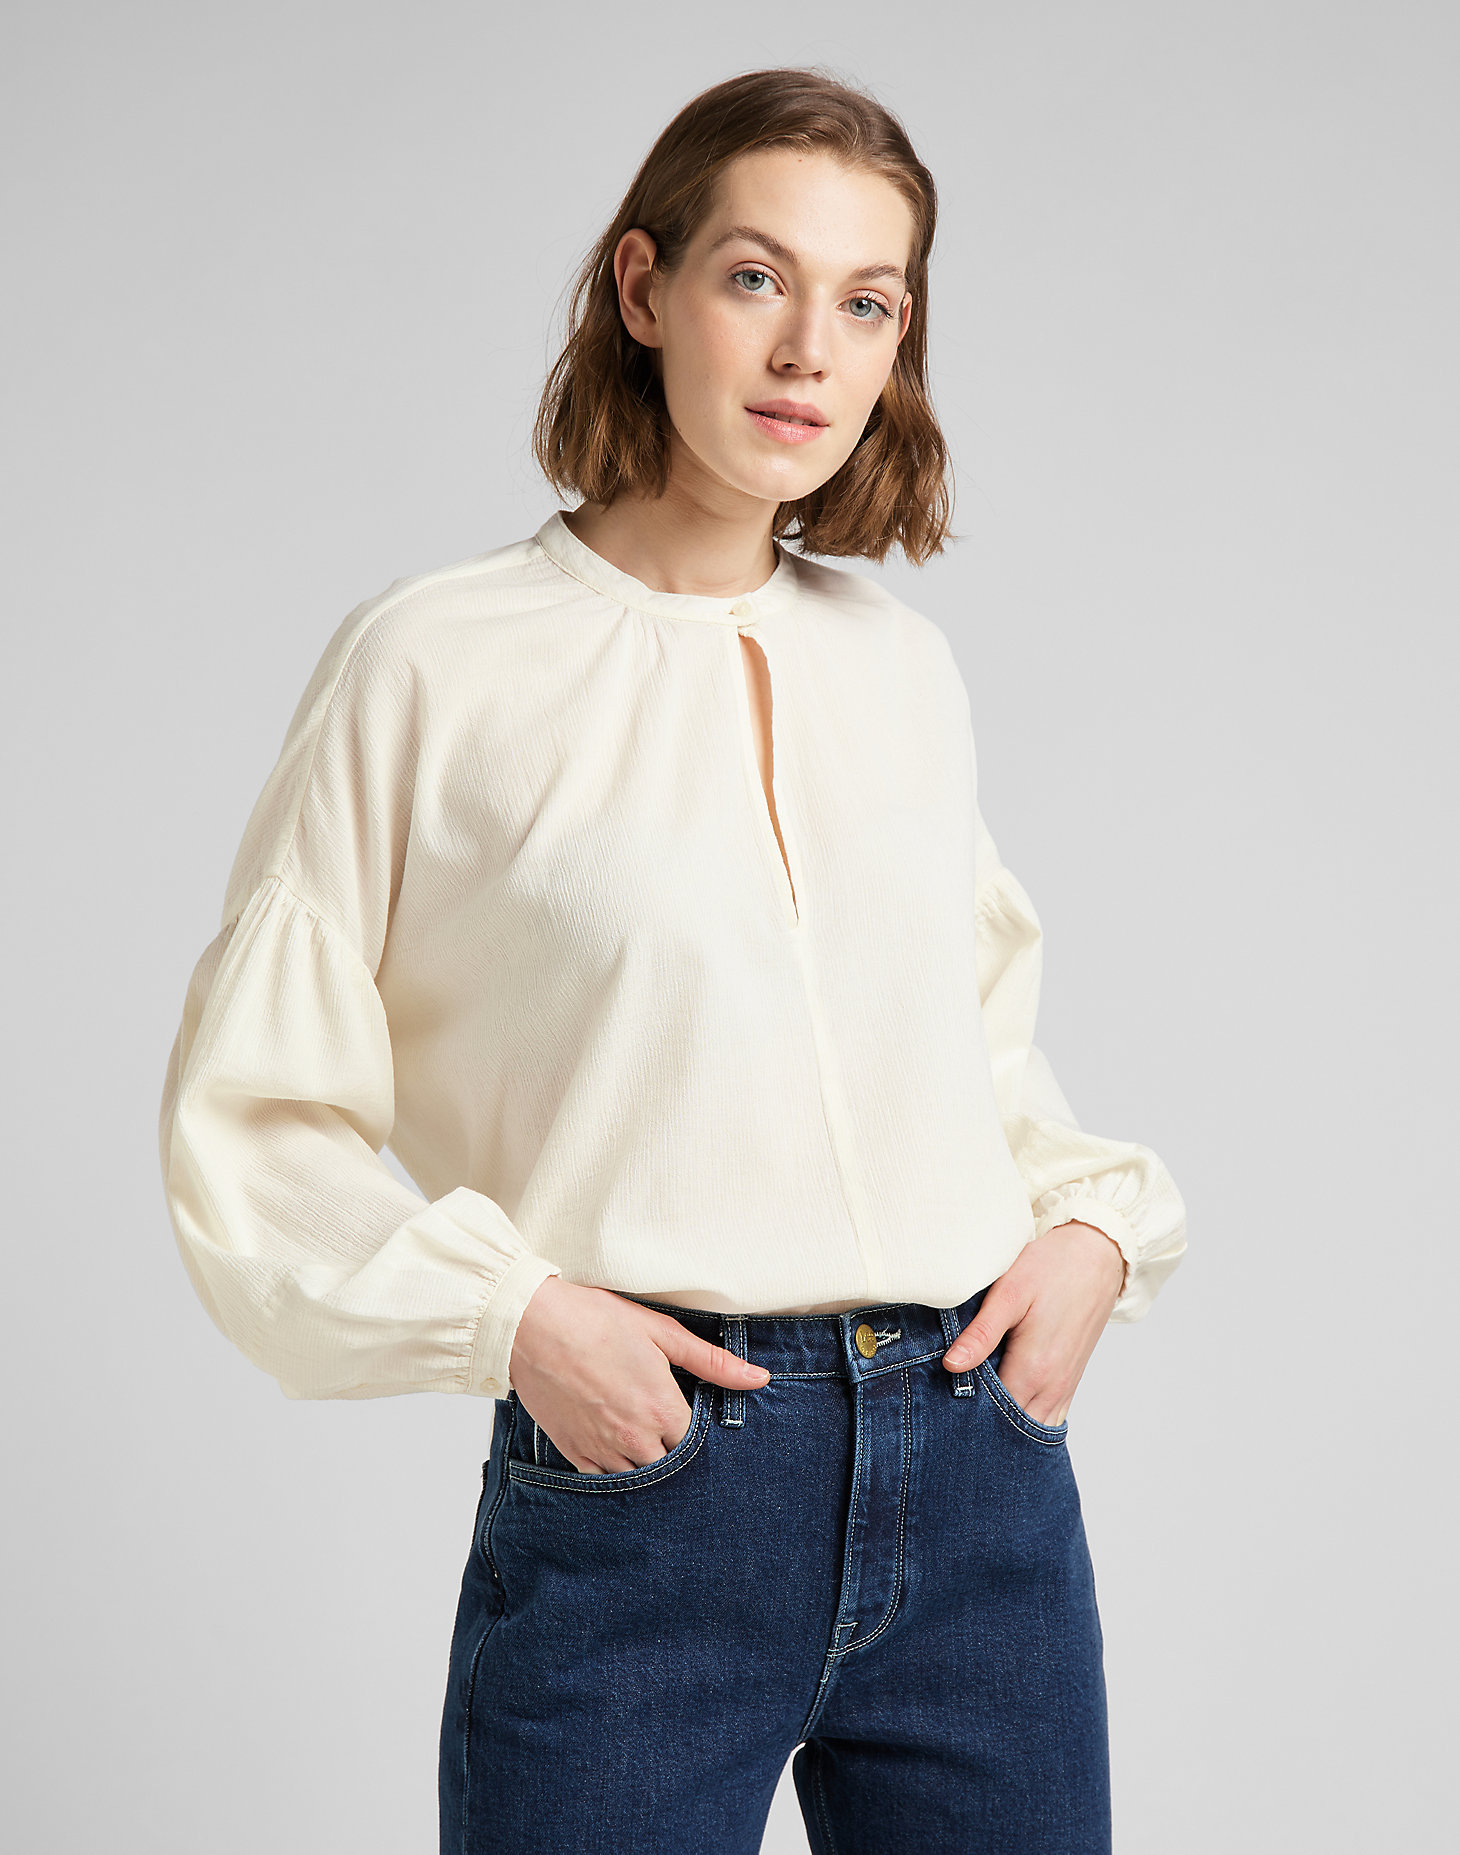 Relaxed Blouse in Ecru main view